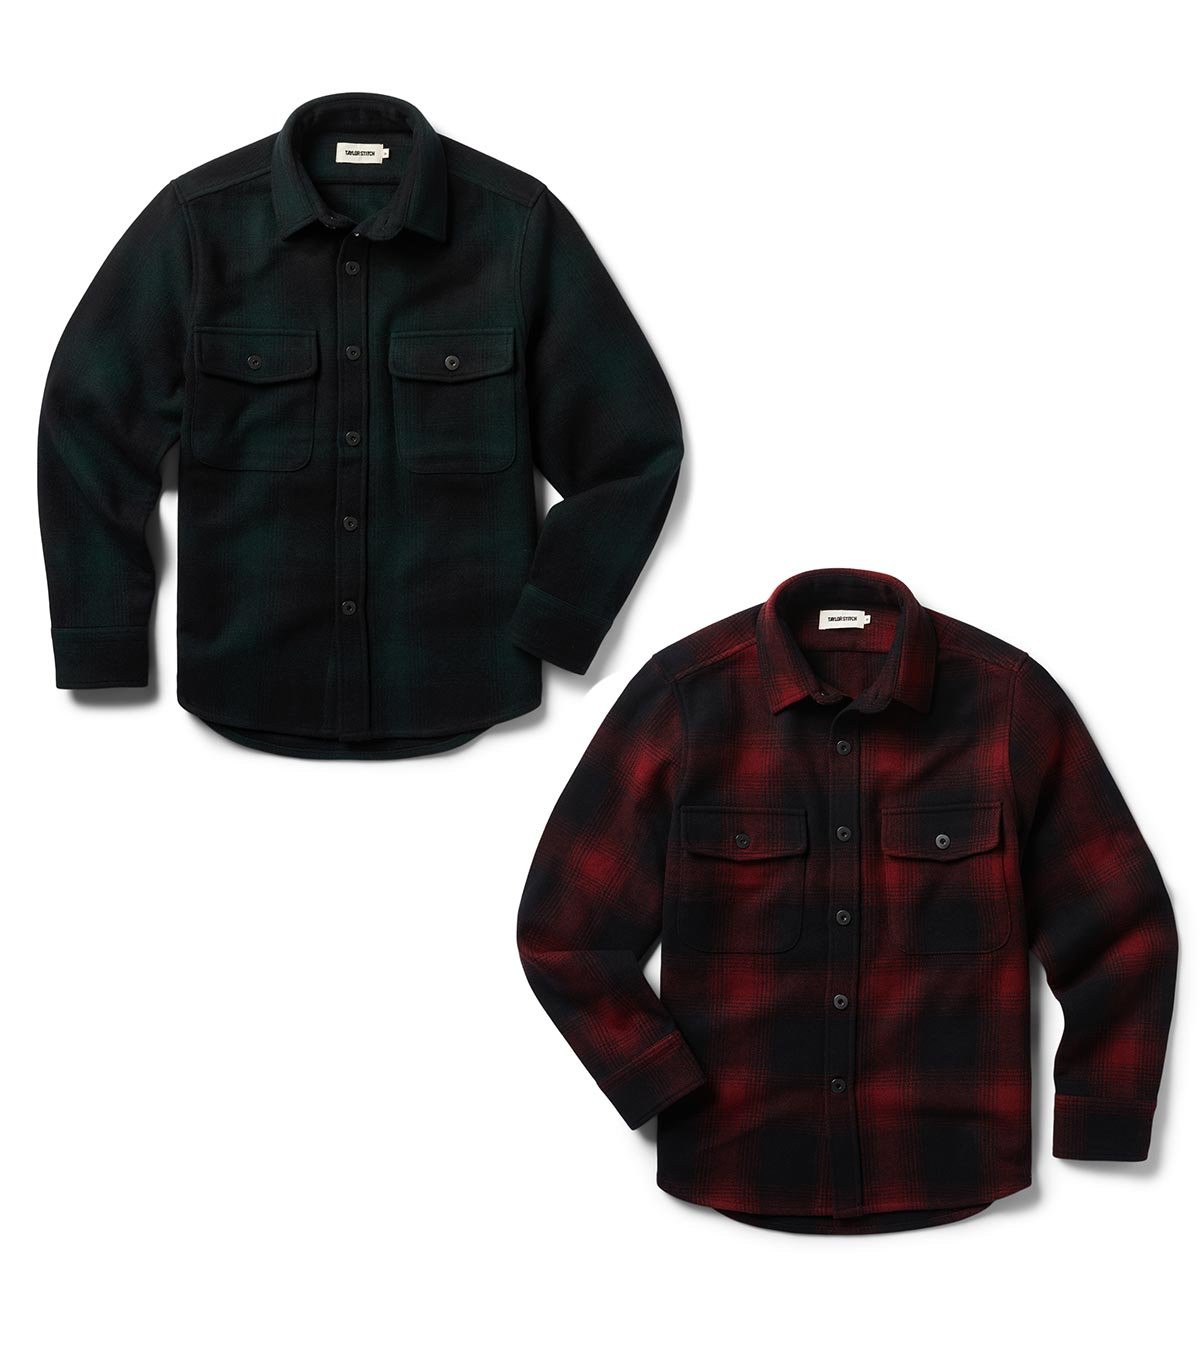 The Explorer Shirt in Spruce Plaid and Cardinal Plaid